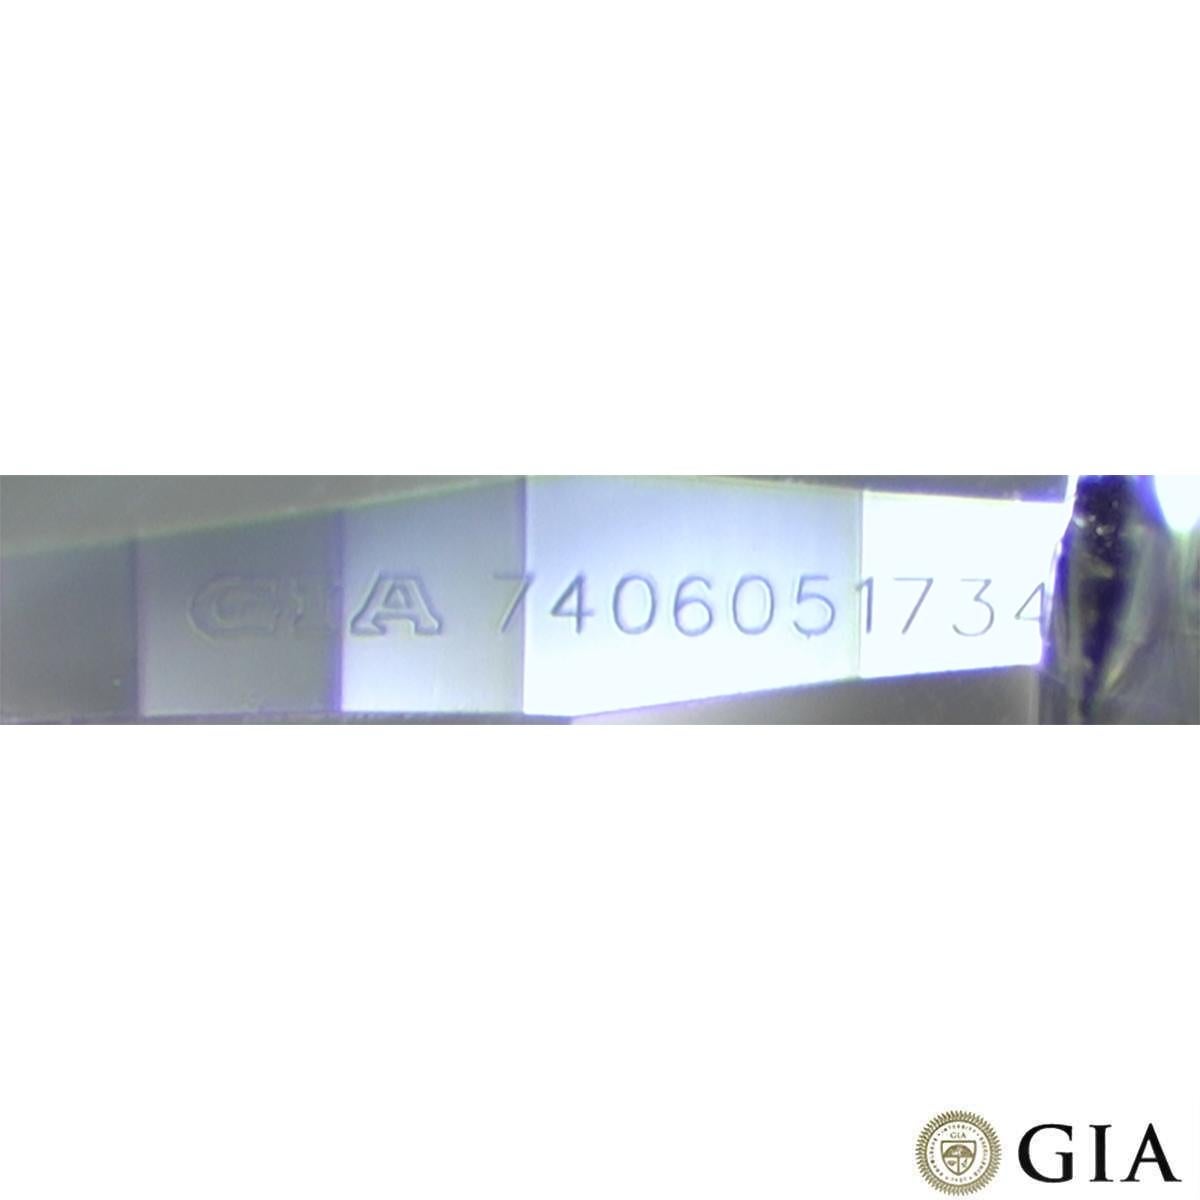 GIA Certified White Gold Oval Cut Diamond Ring 1.00ct D/SI1 For Sale 2